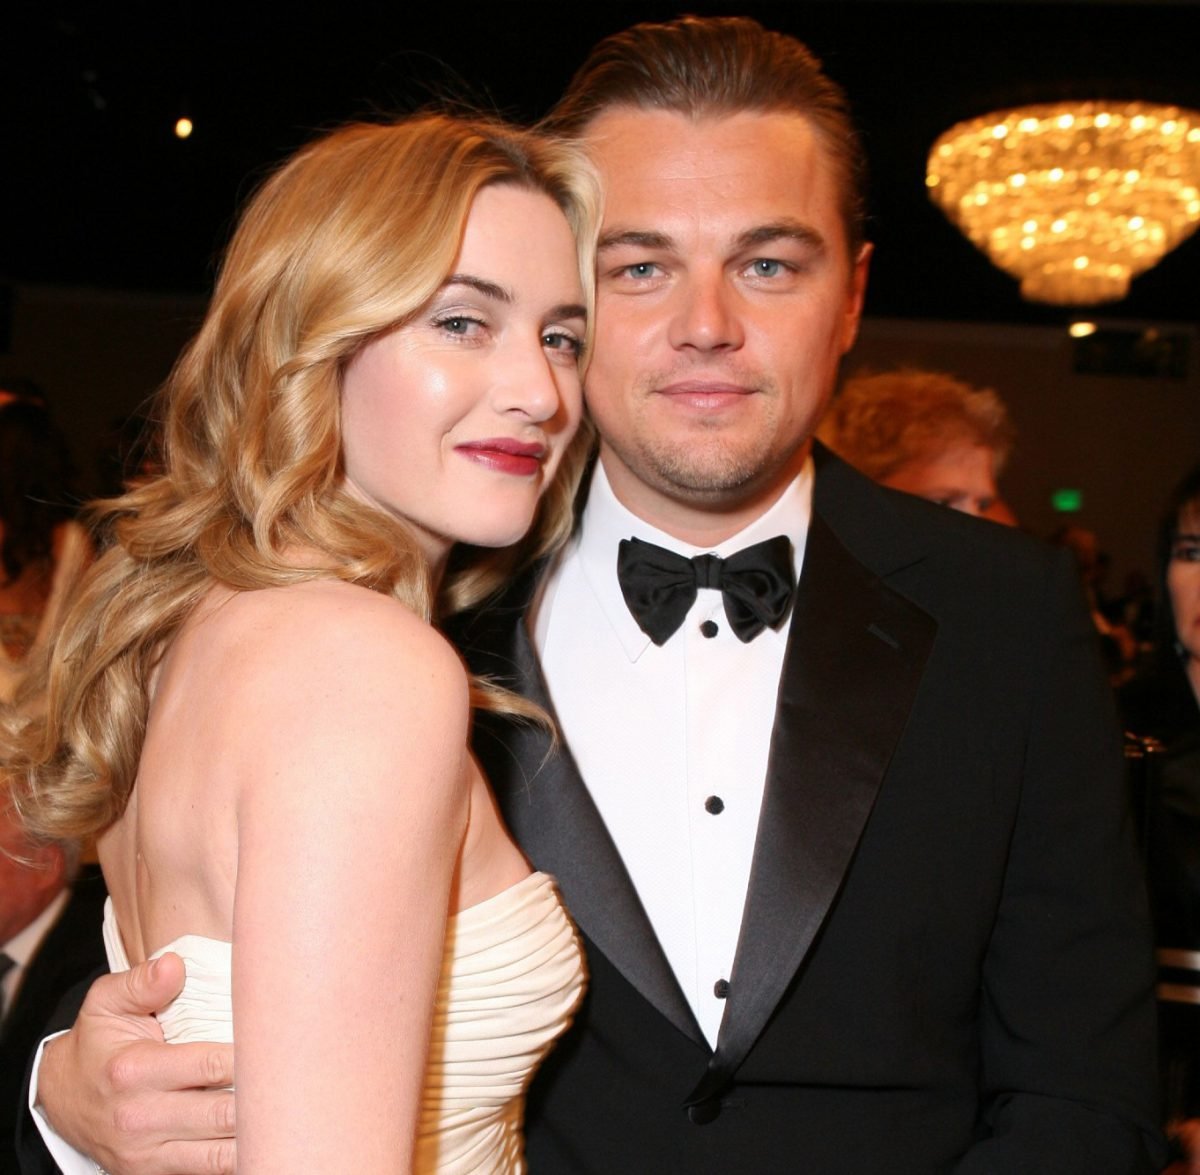 These 7 Platonic Hollywood Relationships Prove It Isn’t Always About Being in Love